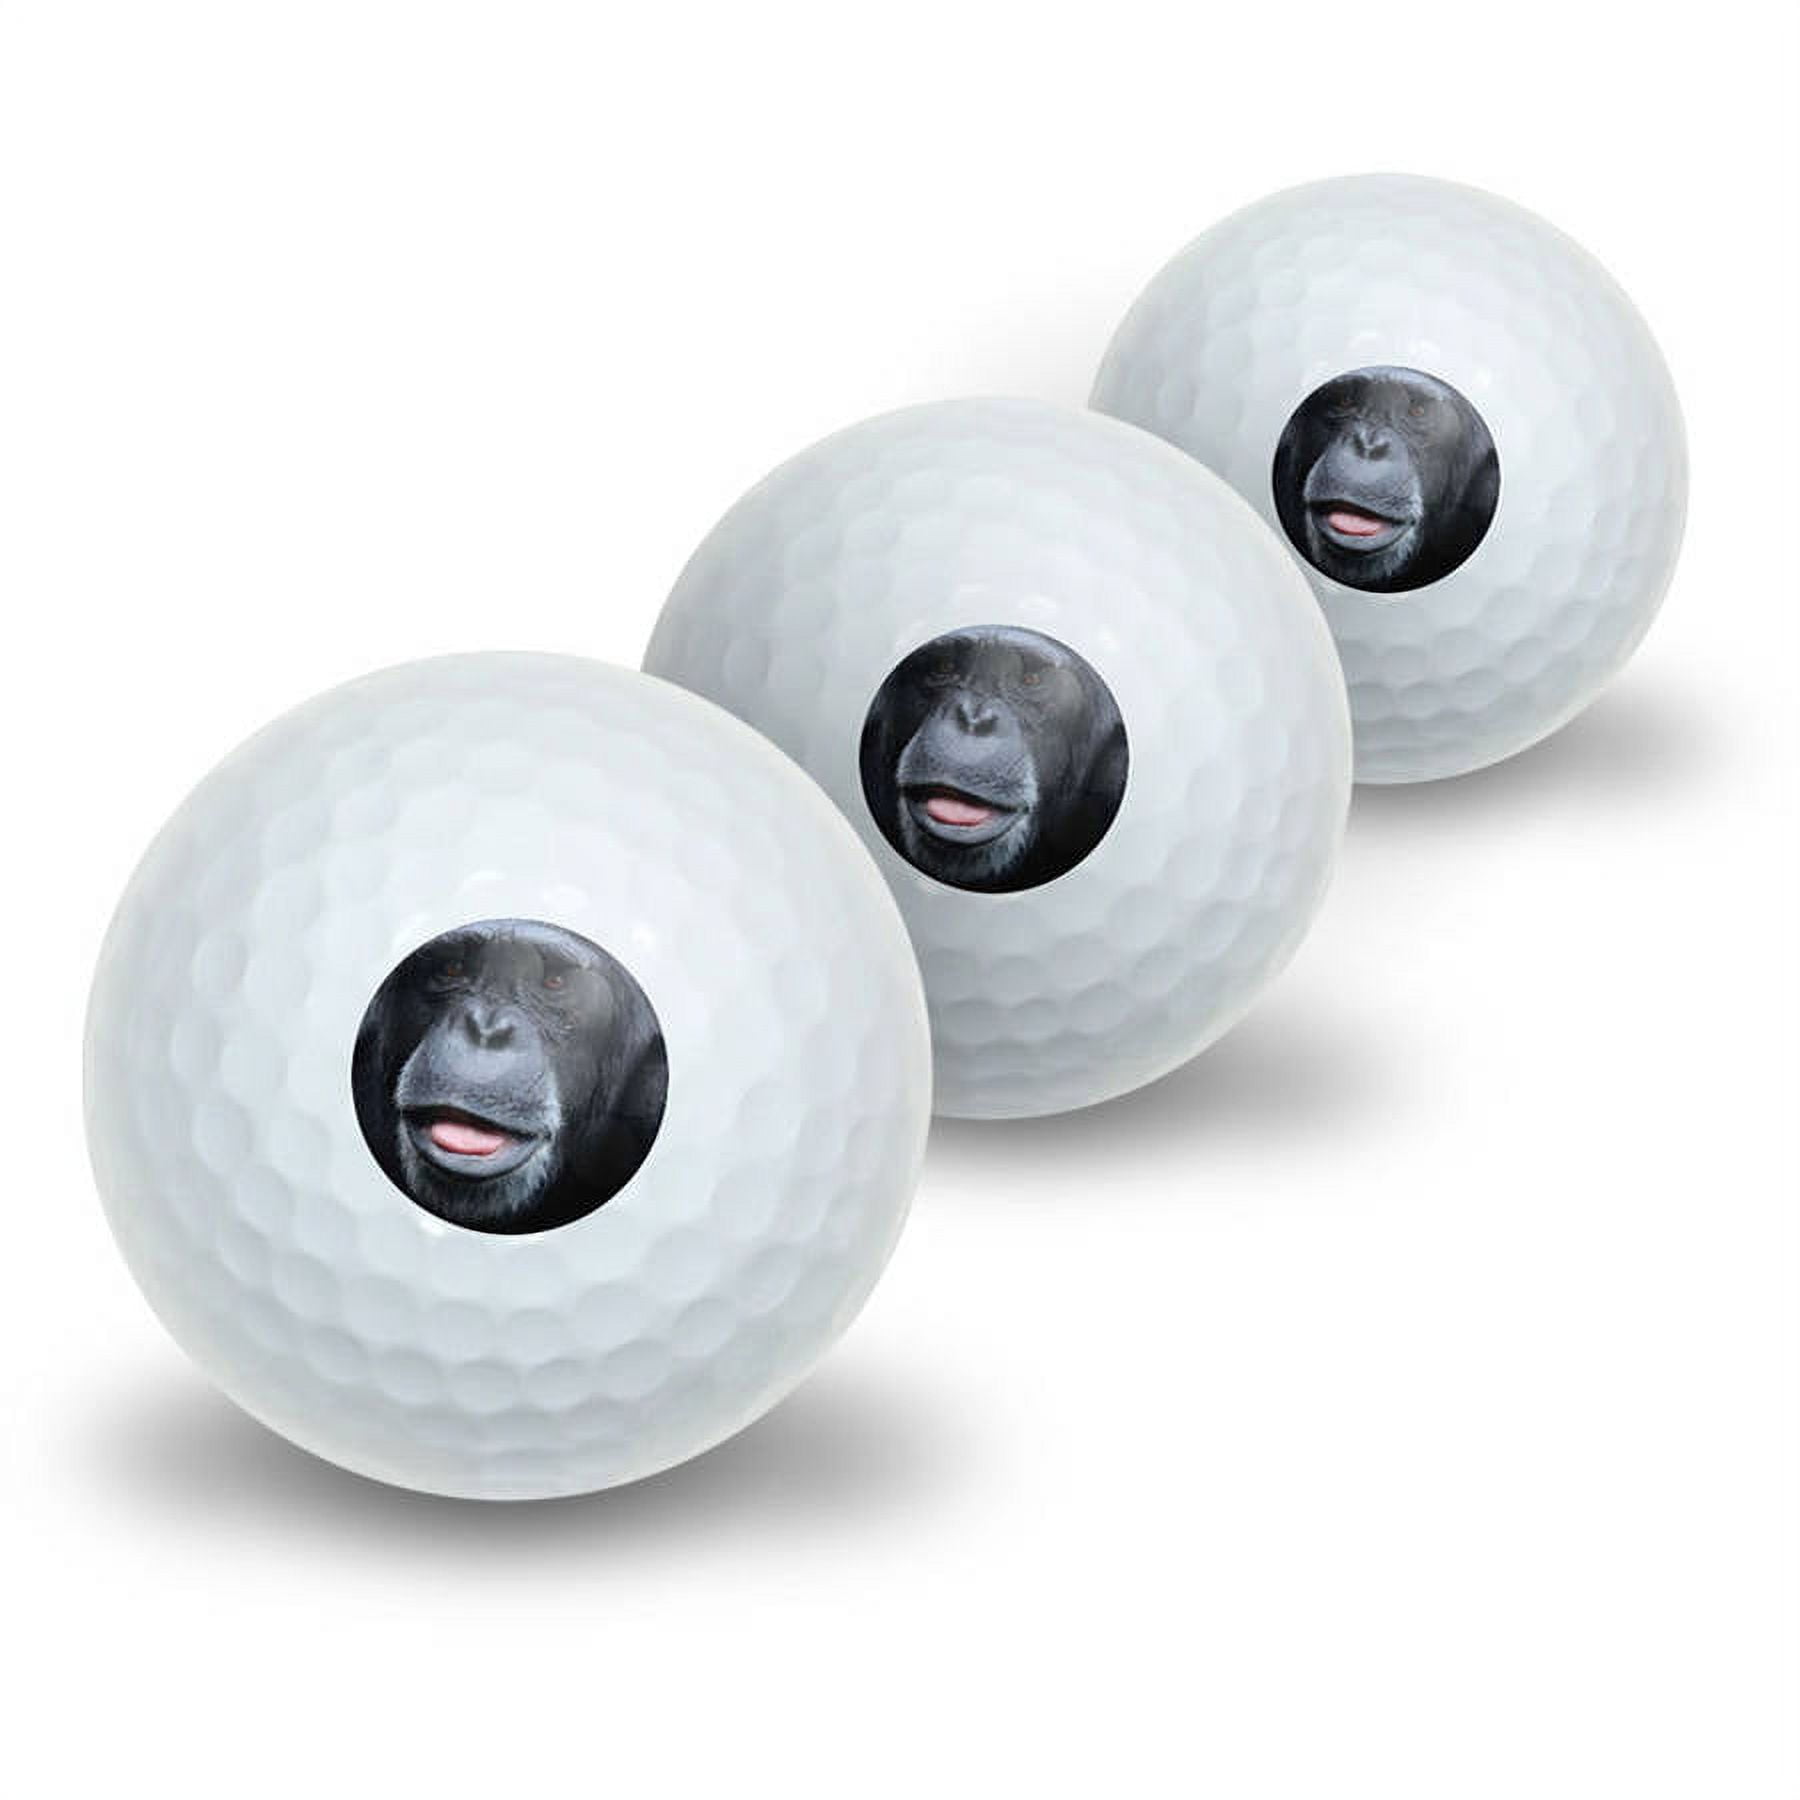 Funny Golf Balls, 6-Pack Colored Golf Balls - Fun Golf Gifts for All  Golfers, Novelty Golf Balls for Kids & Dads, Cool Golf Accessories for Men  Gift